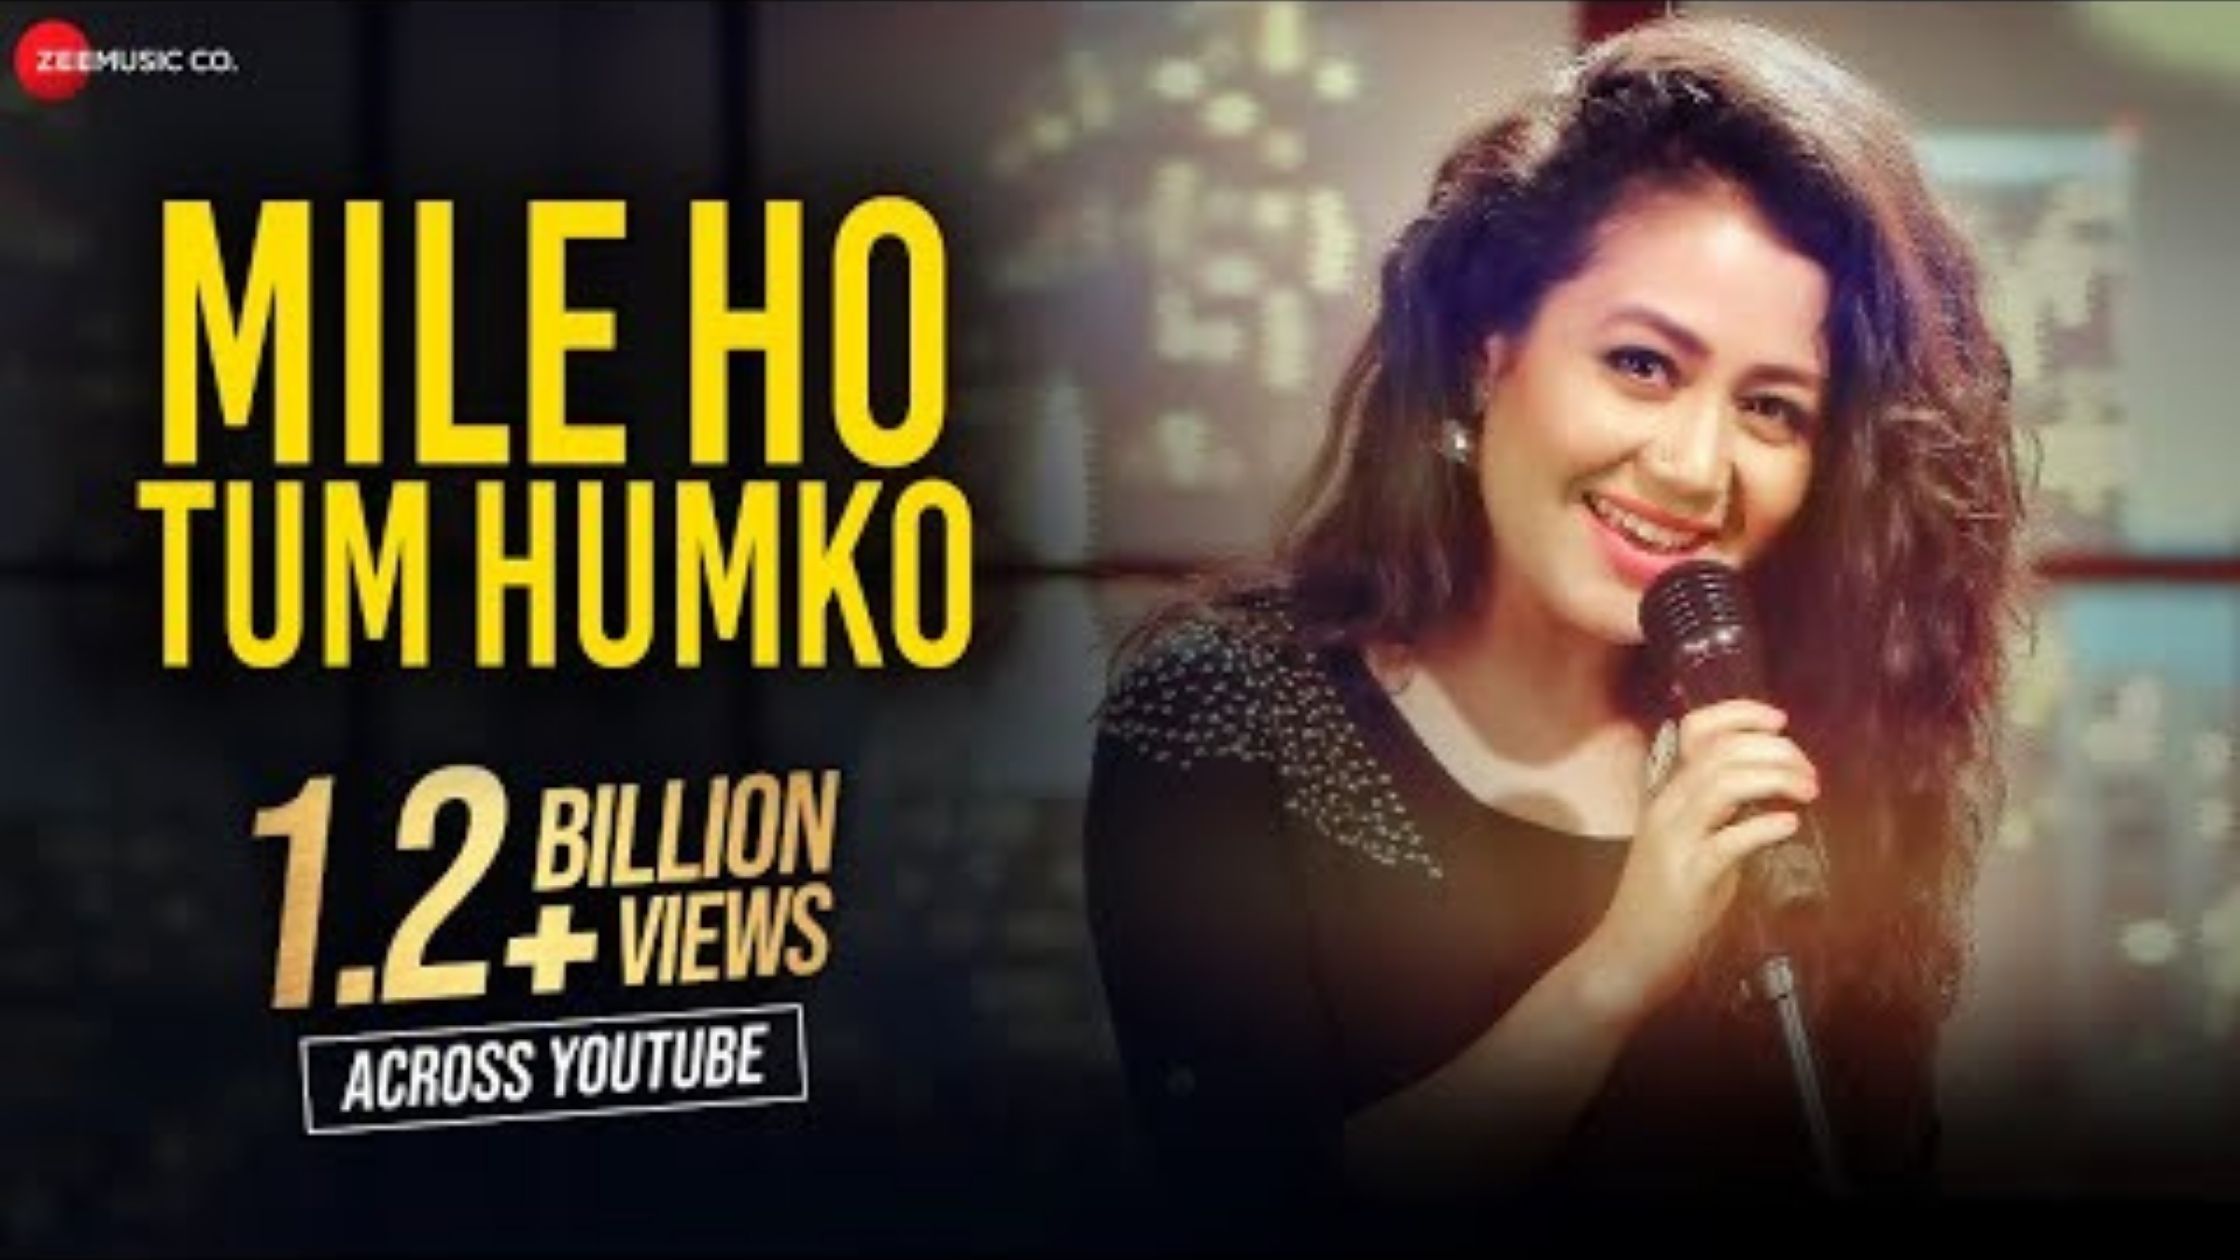 ‘MILE HO TUM HUMKO’ BECOMES FIRST INDIAN MUSIC VIDEO TO REACH 1 BILLION